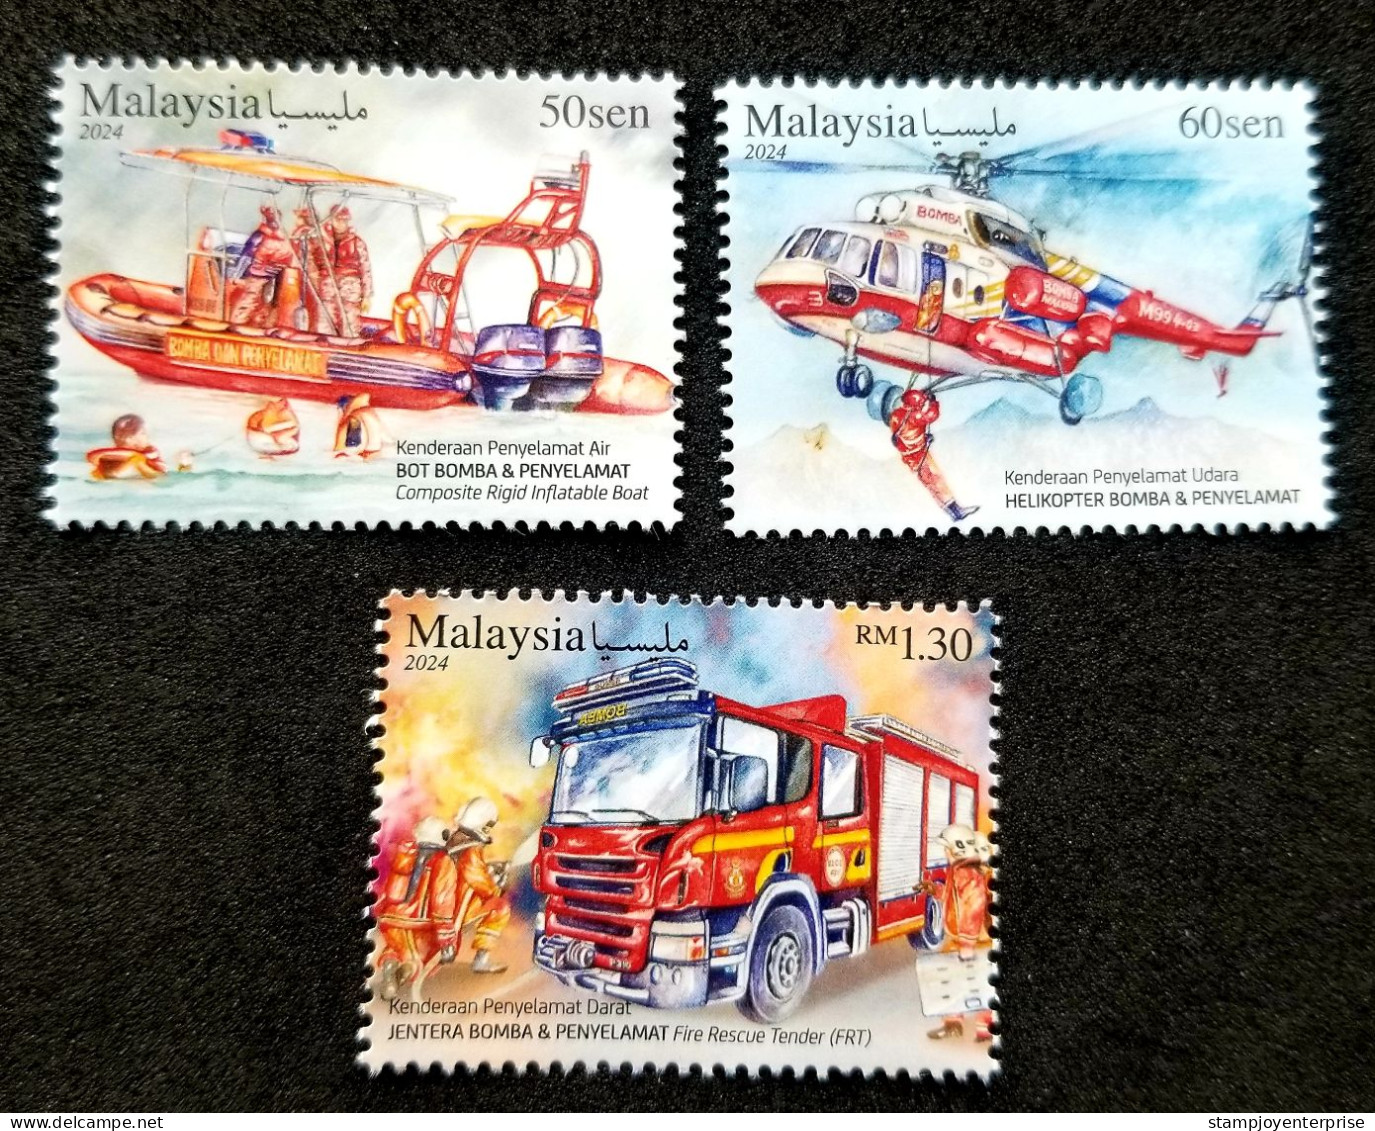 Malaysia Rescue Vehicle 2024 Helicopter Fire Engine Brigade Boat Ship Transport Firefighting Fireman (sheetlet) MNH - Malasia (1964-...)